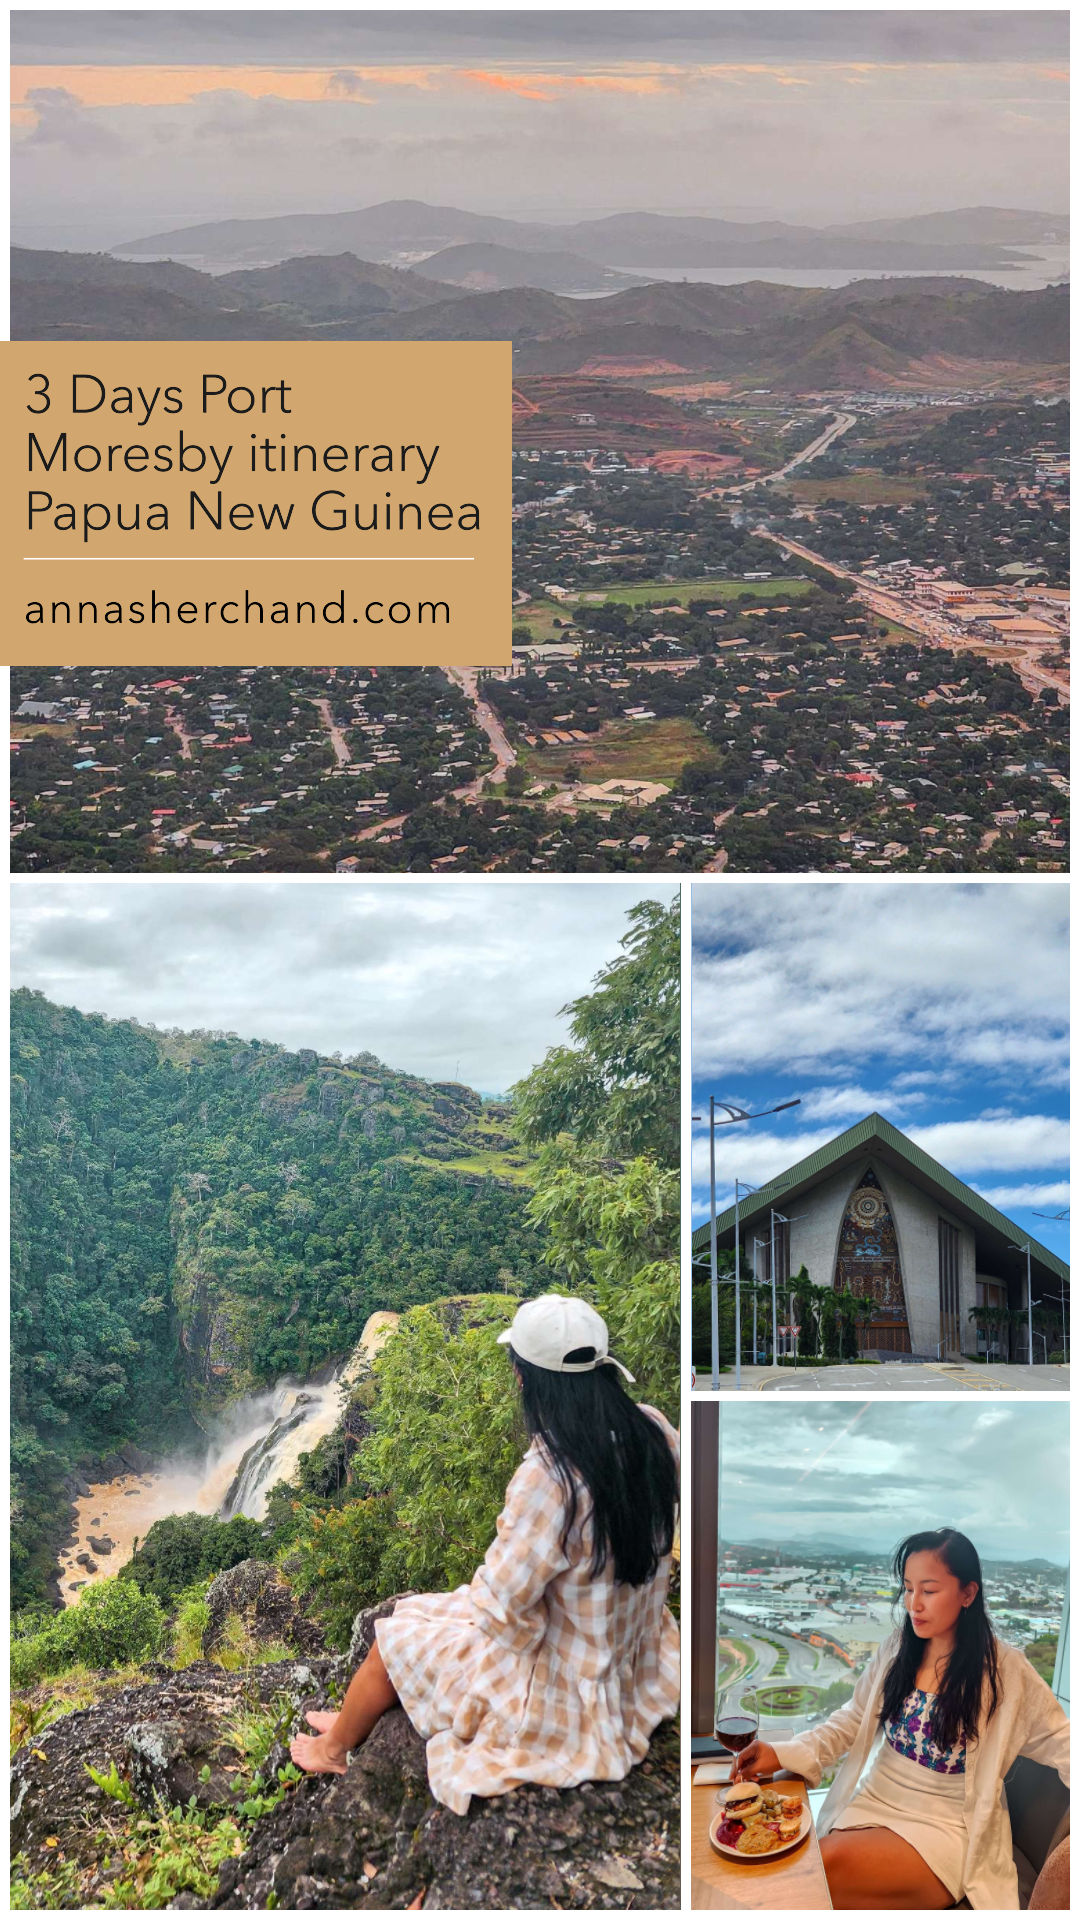 3 Days Port Moresby itinerary